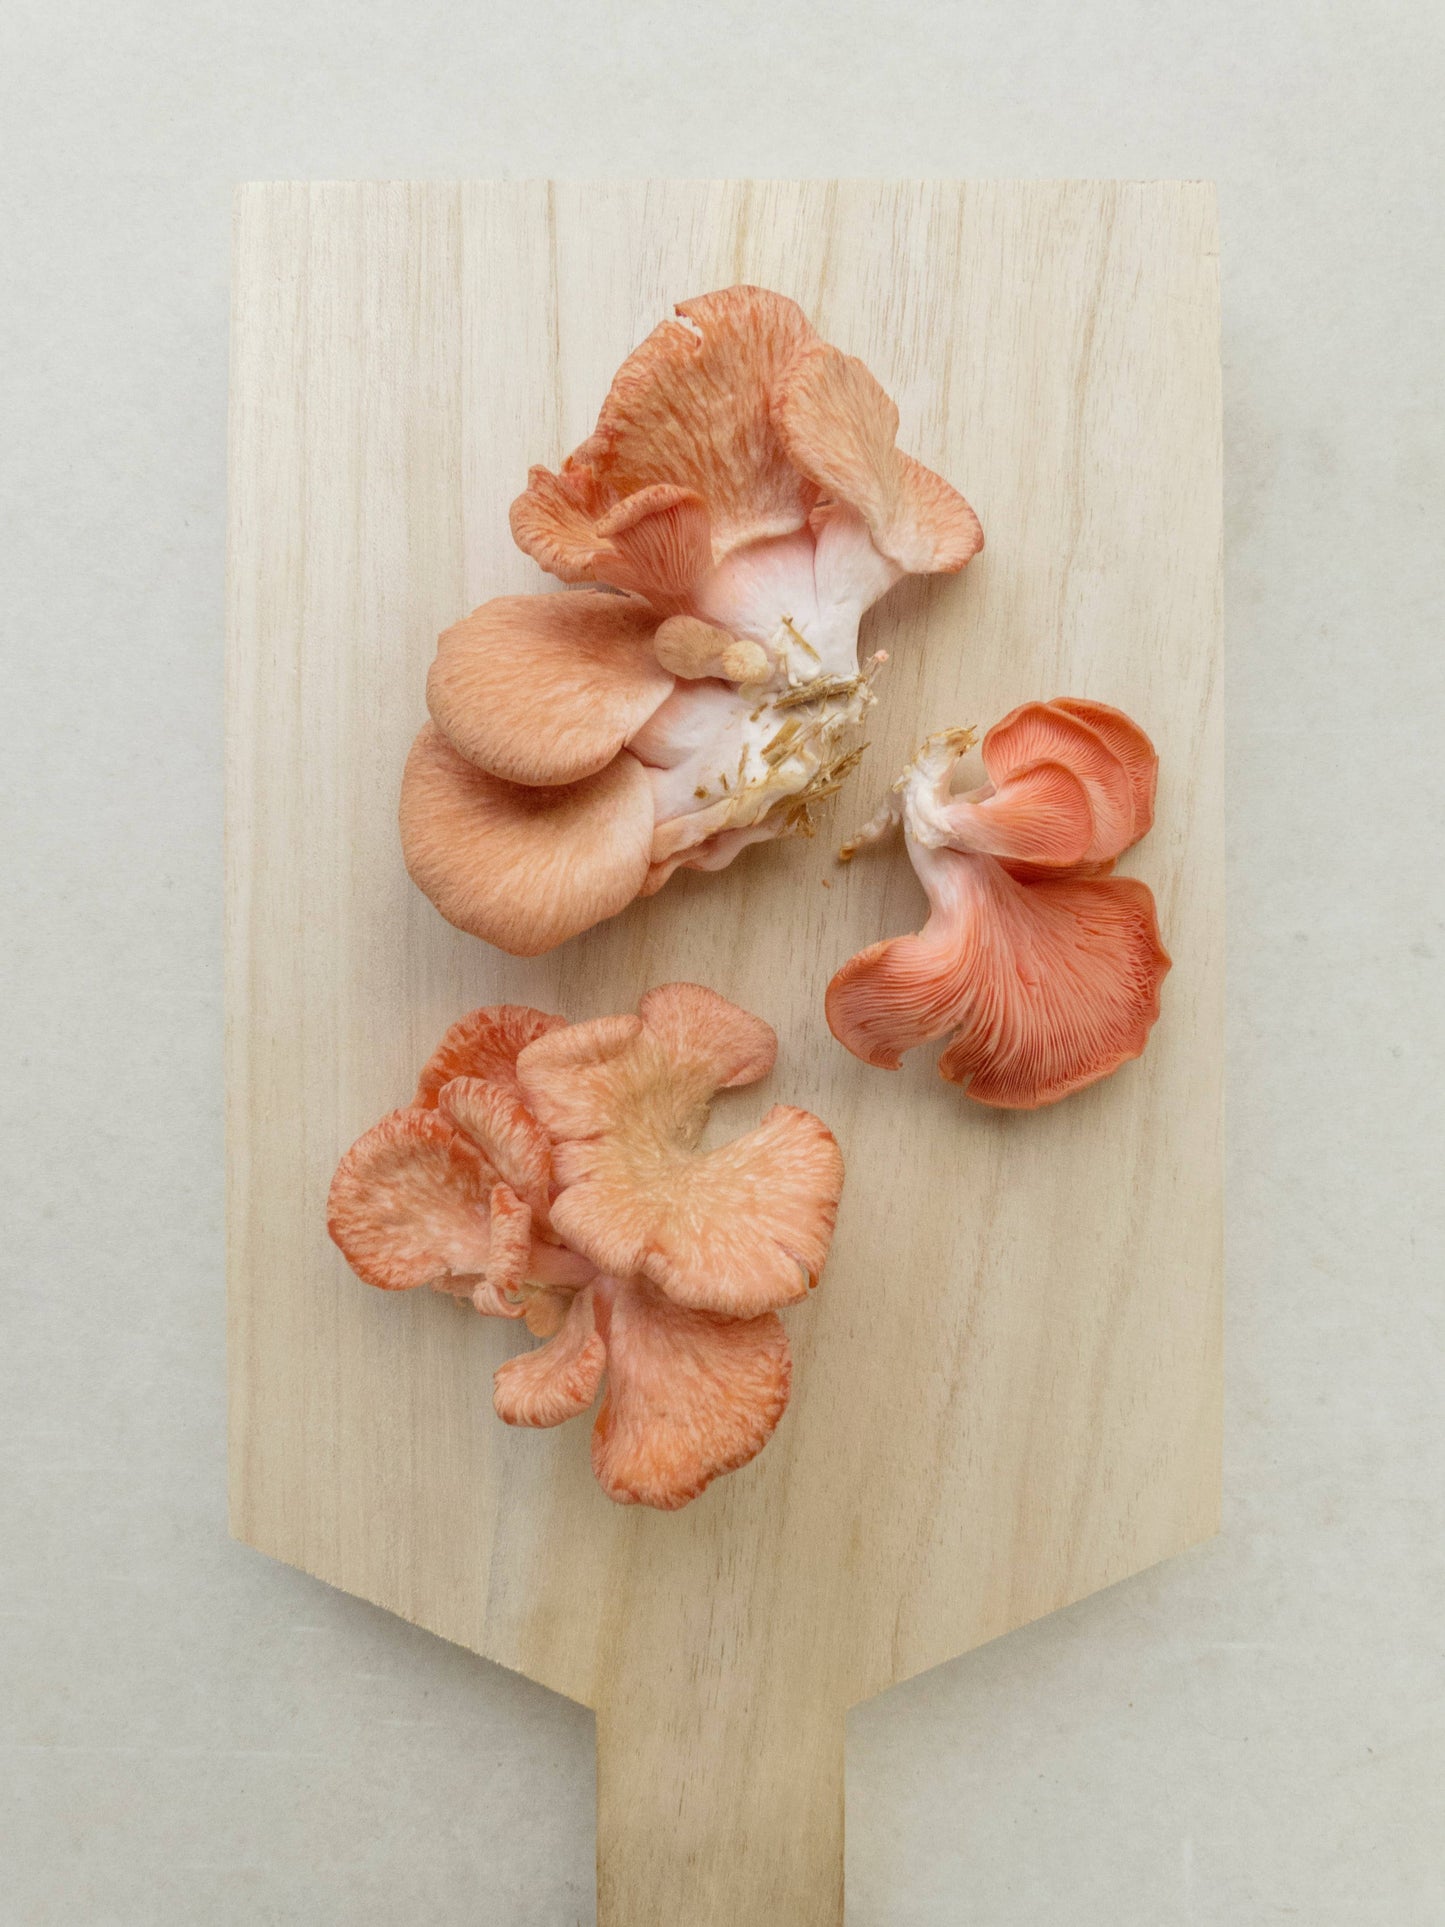 Foragers Galley - Pink Oyster Mushroom Grow-at-Home Kit